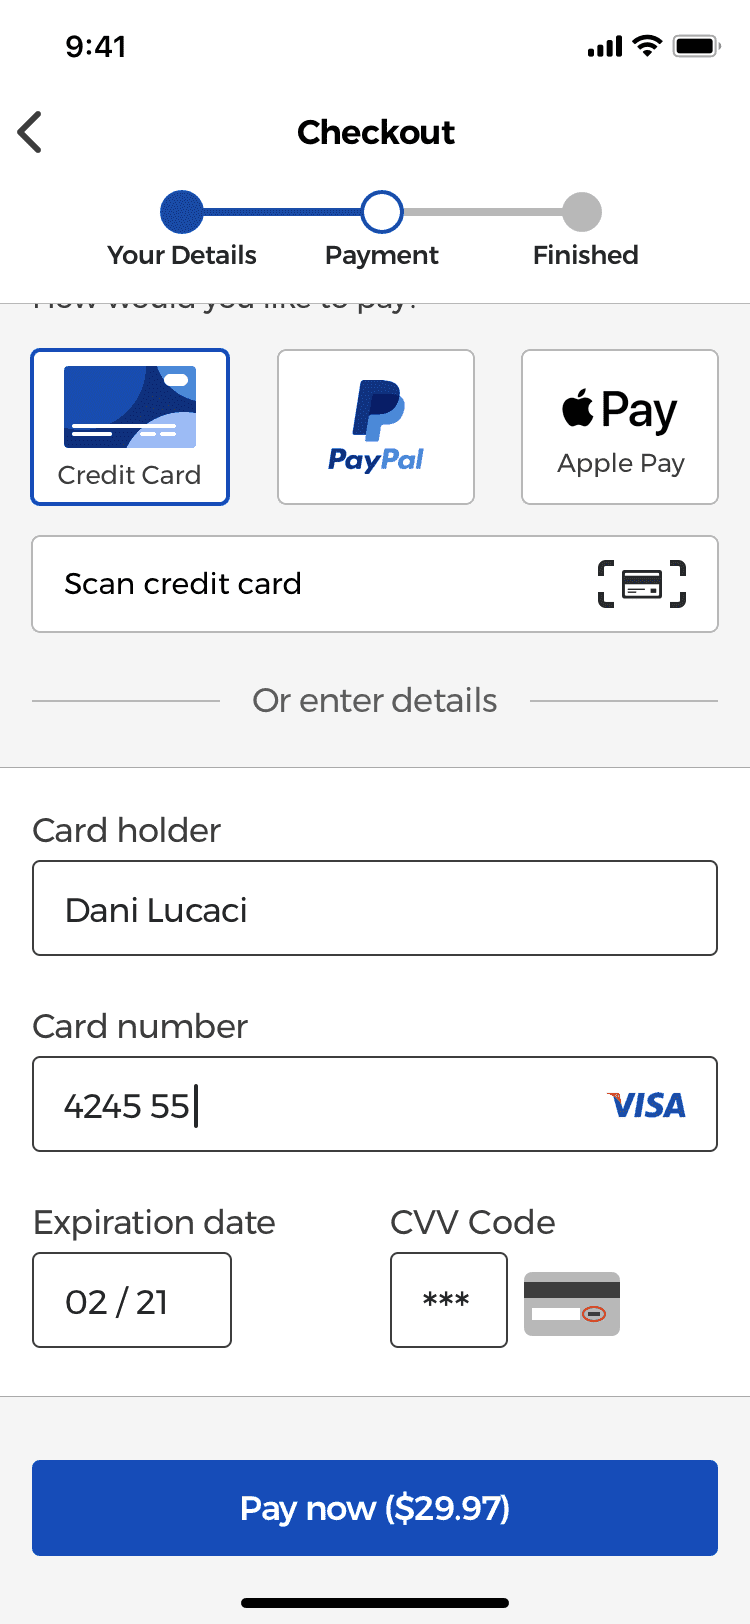 Guest checkout with credit card form interaction.